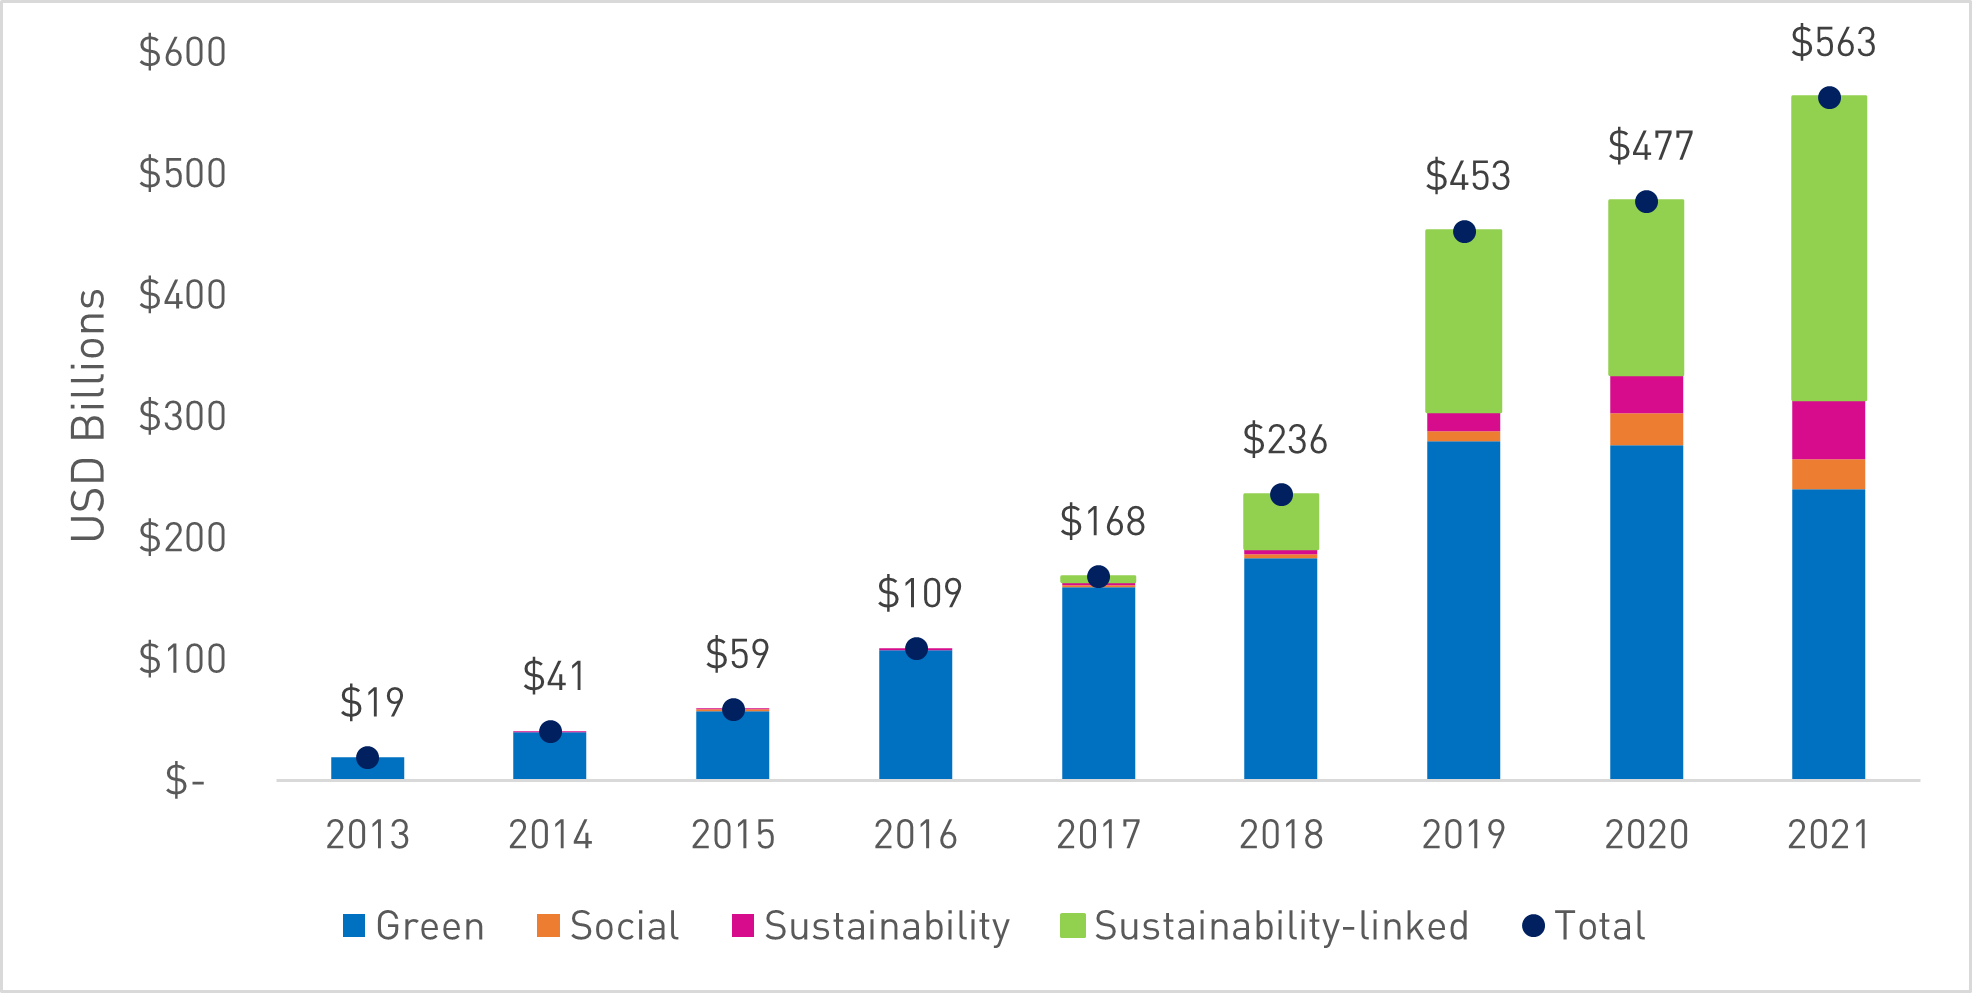 the growth of esg-linked bonds, especially sustainability-linked bonds from 2017 to present. As of 2021, esg-linked bonds make up a total of 563bn USD